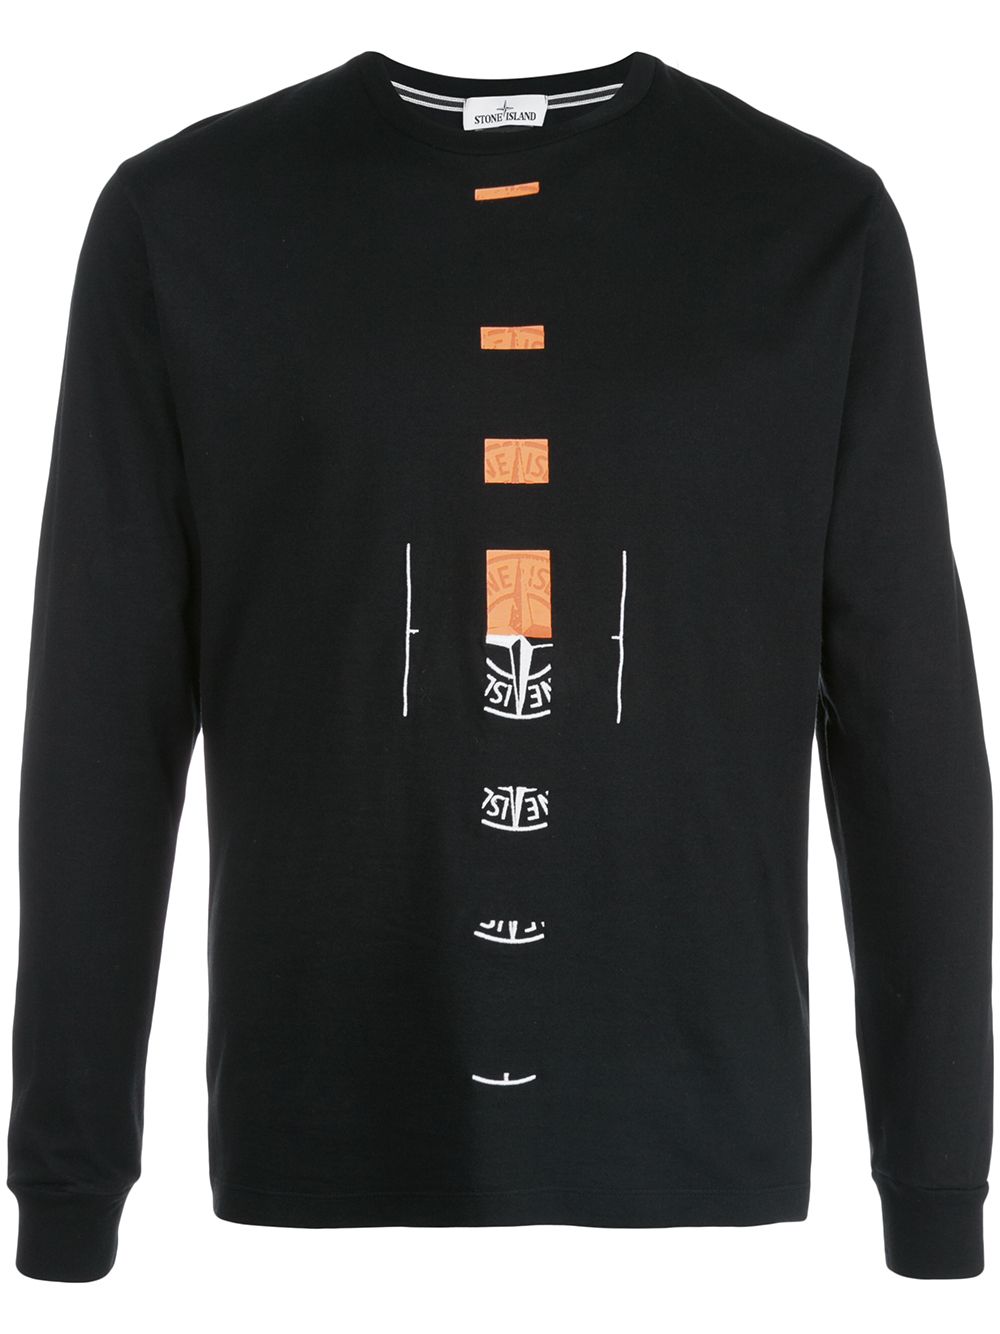 Stone Island Graphic Print Long Sleeve Top In Black